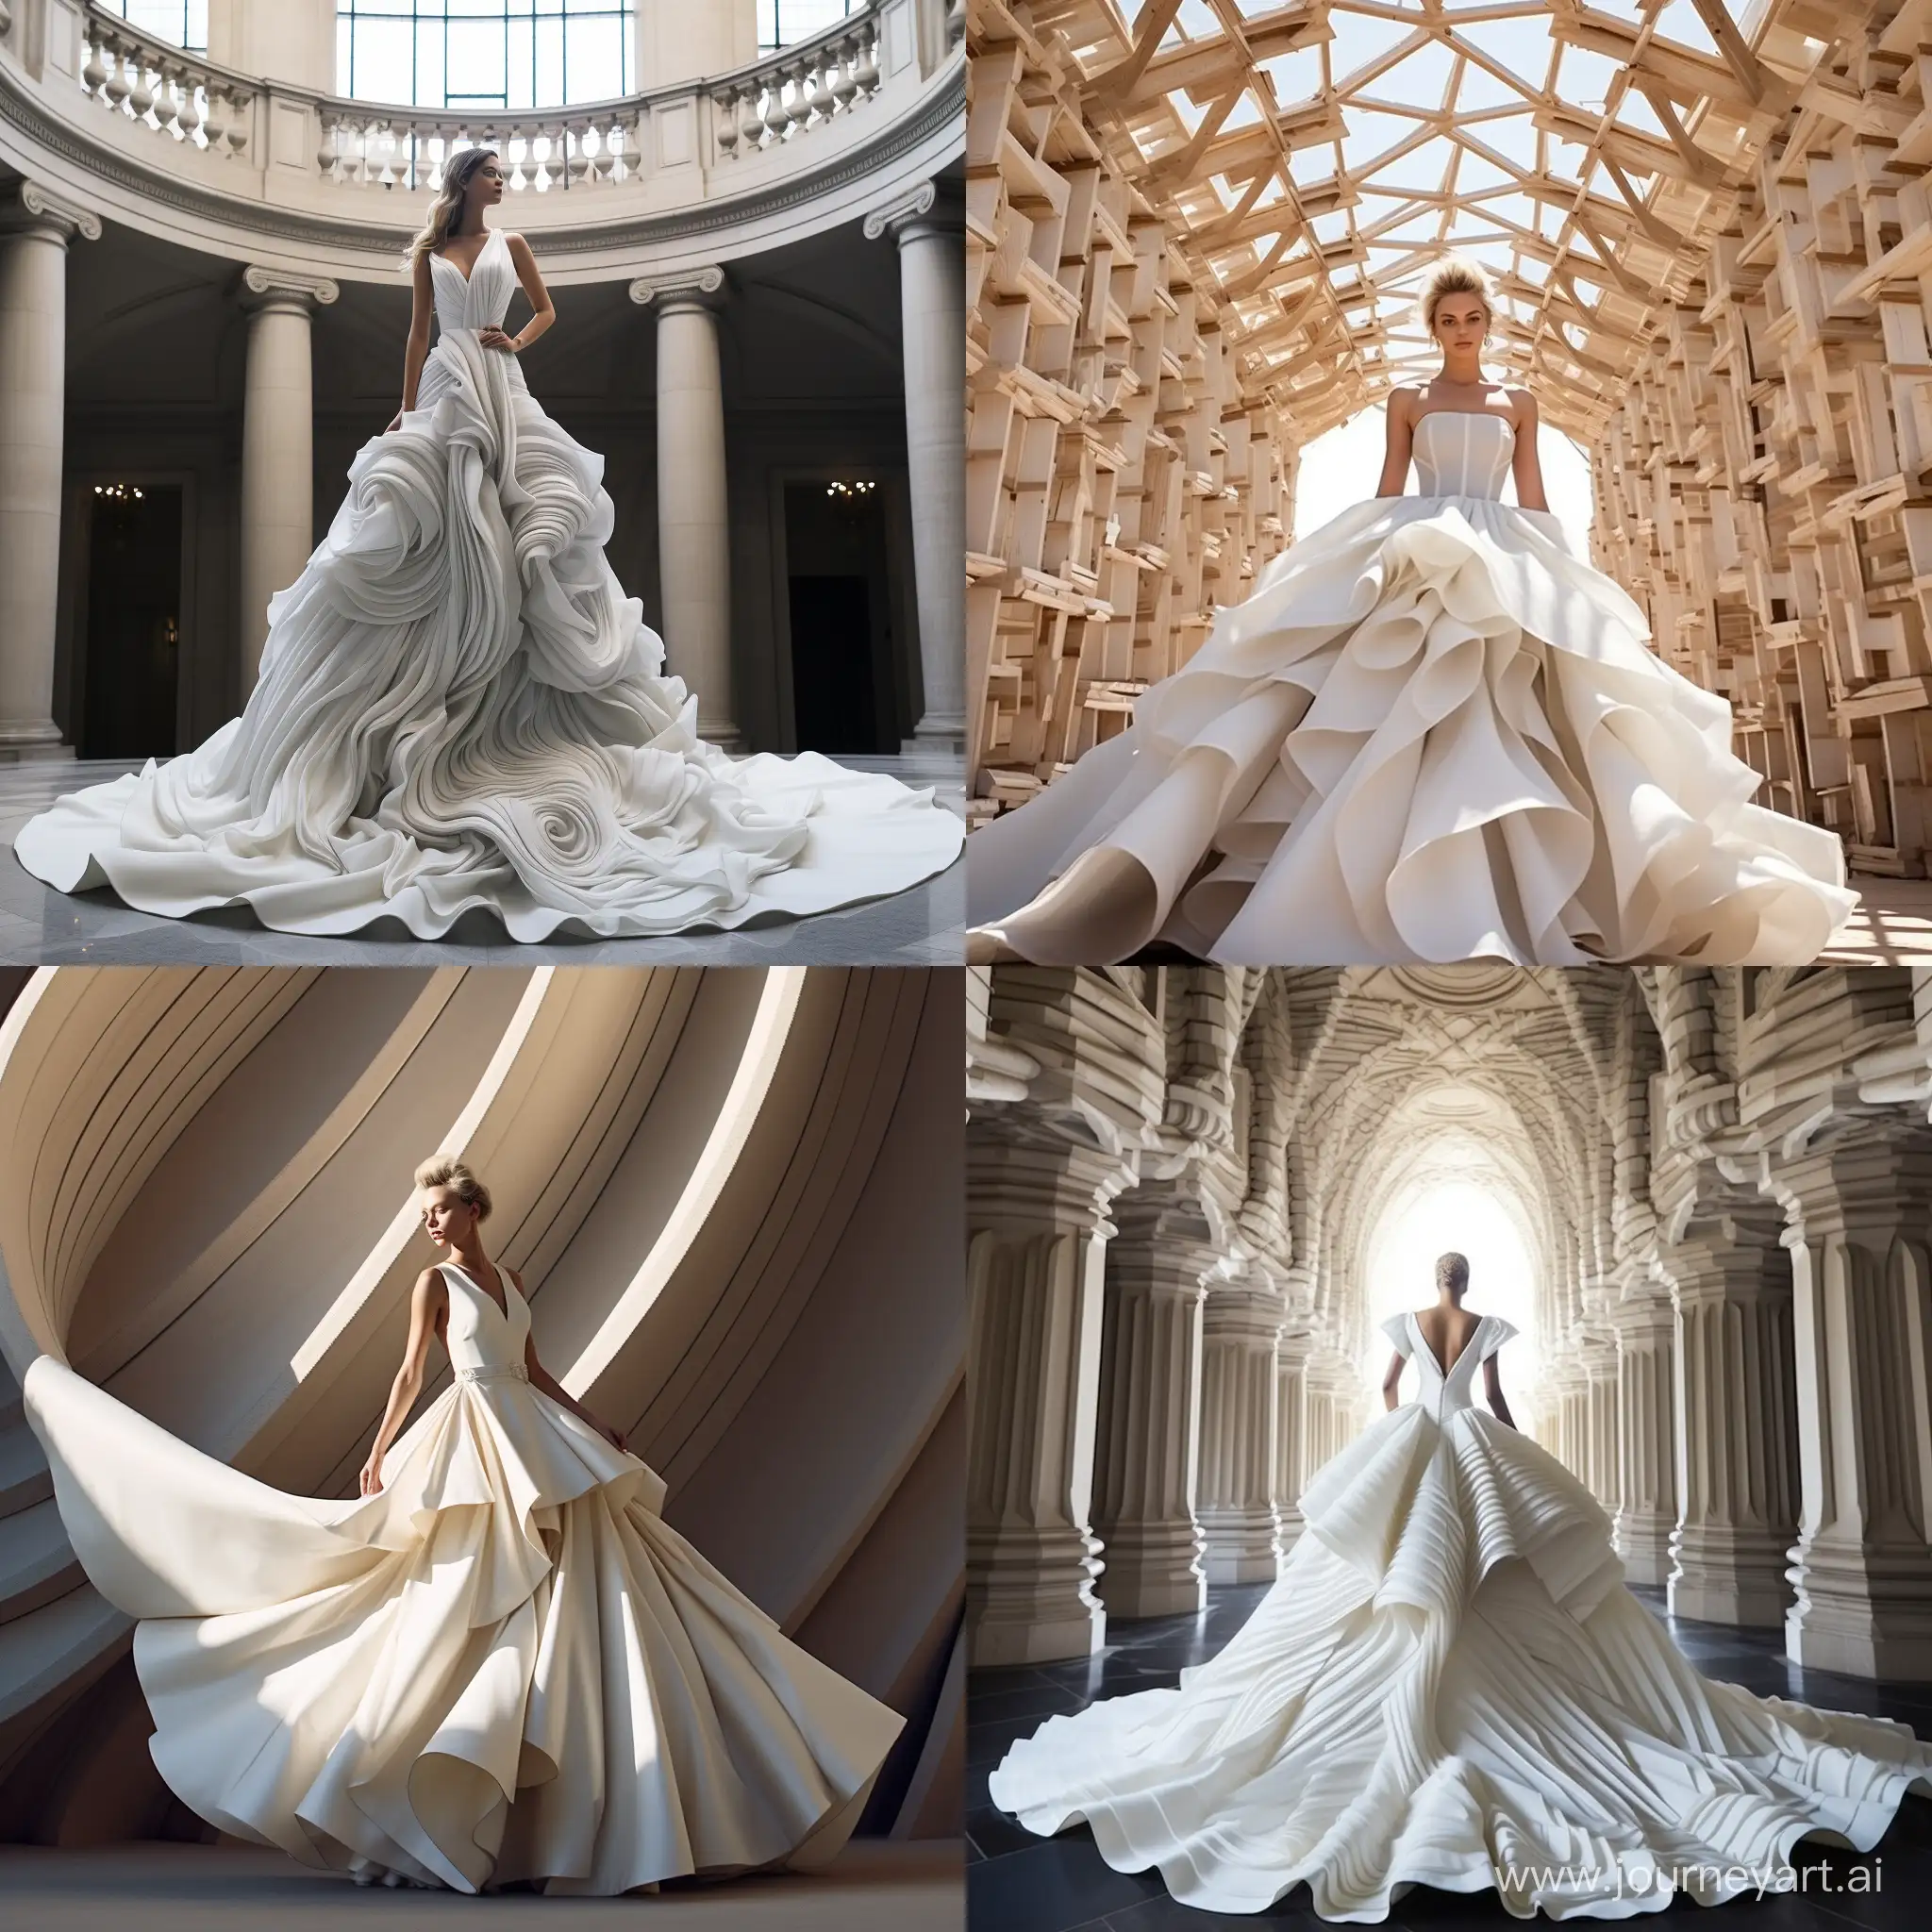 Fashionable-Wedding-Gowns-at-the-Intersection-of-Style-and-Architecture